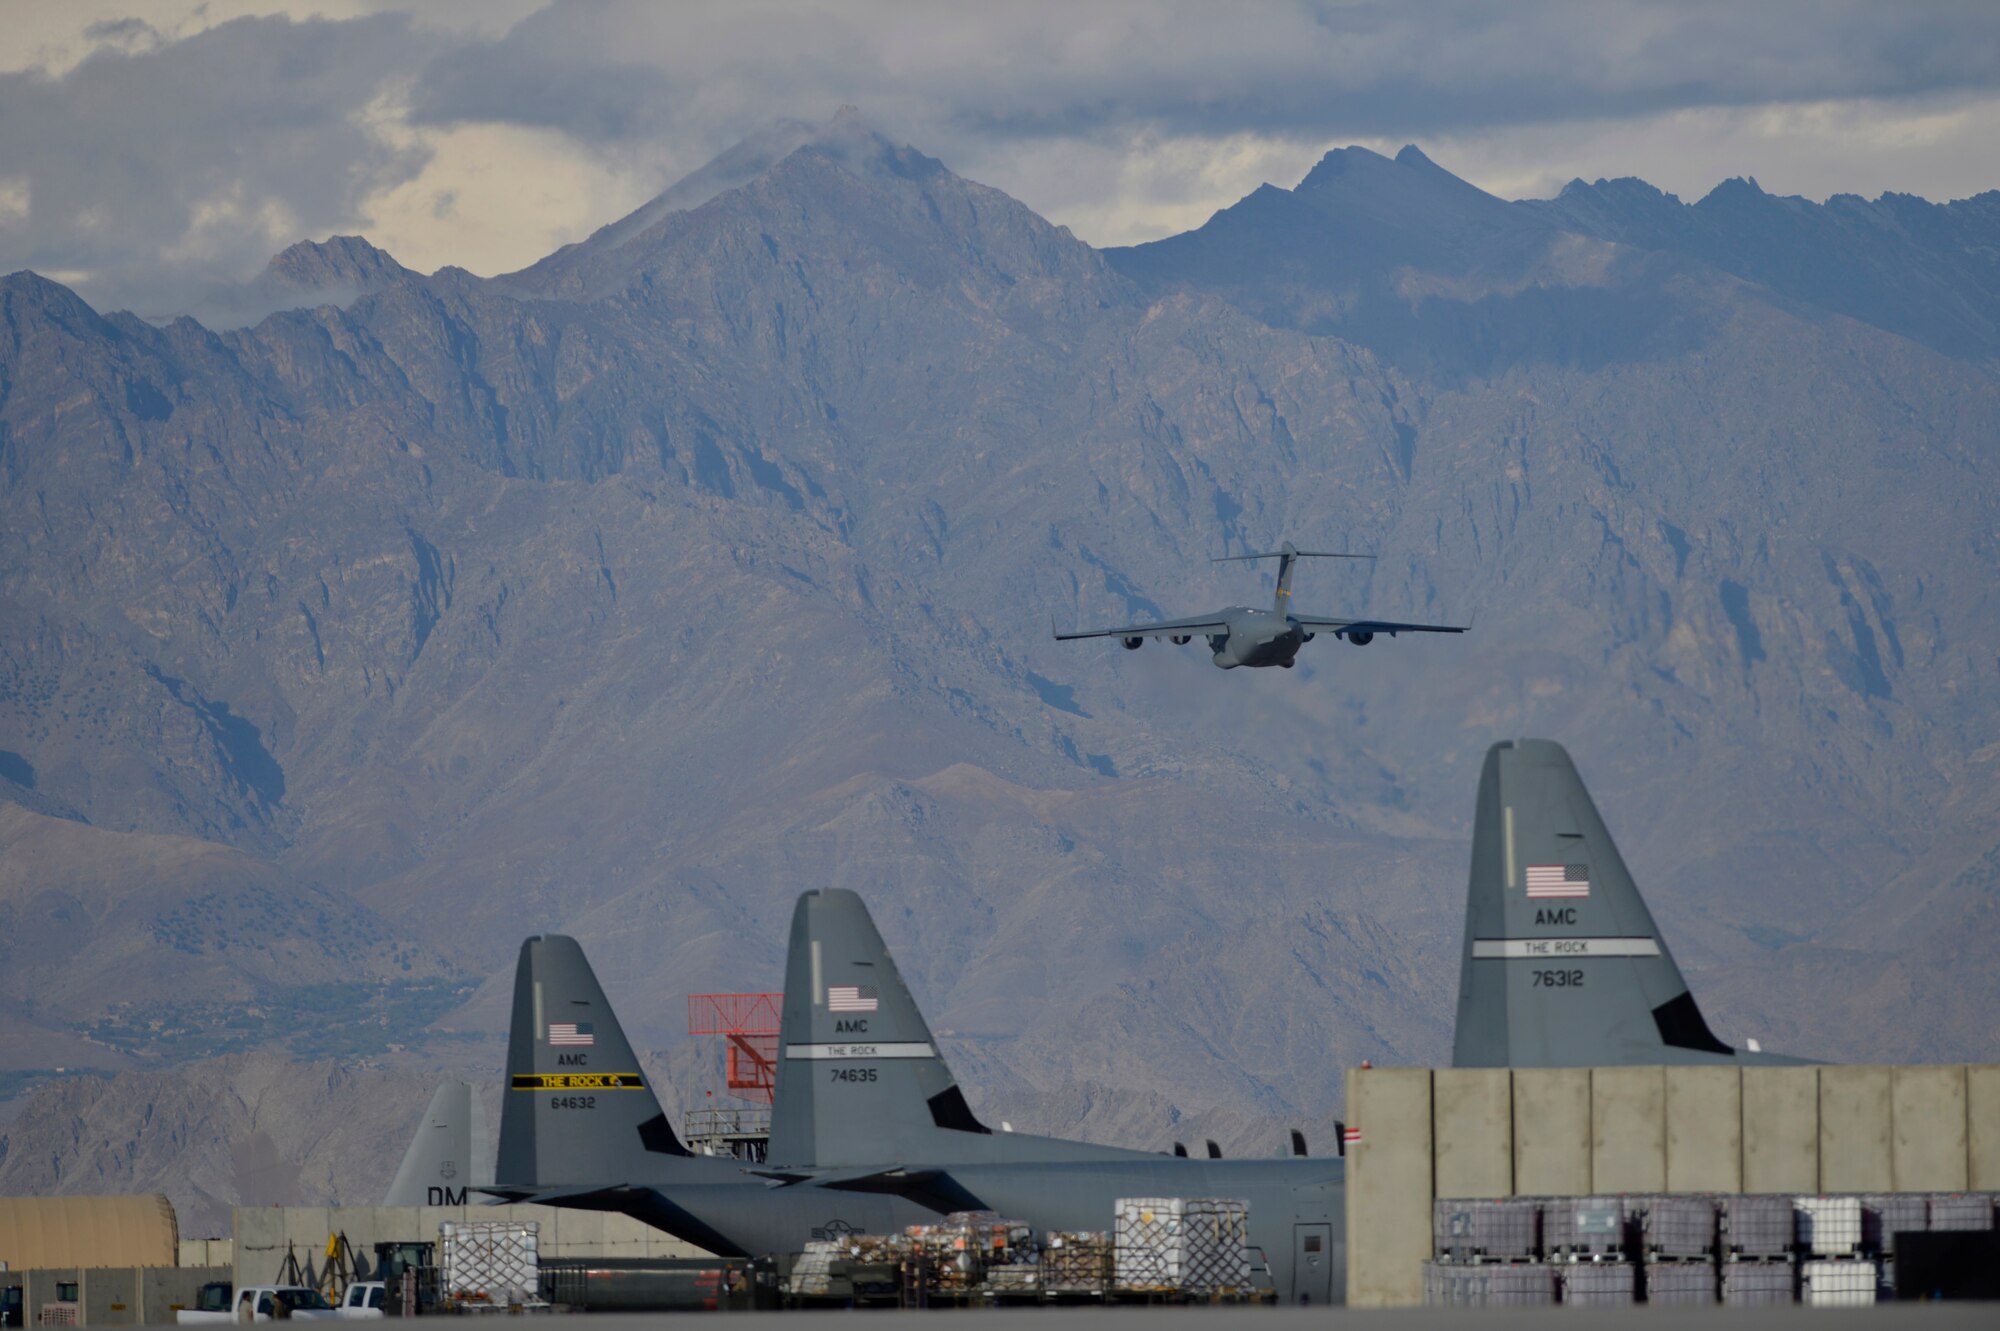 A U.S. Air Force C-17 Globemaster takes off into the mountains at Bagram Airfield, Afghanitan Oct. 23, 2014.  Since 2006, the annual airfield traffic count has increased from 143,705 to 333,610 as the support for Operation Enduring freedom nears its end. (U.S. Air Force photo by Staff Sgt. Evelyn Chavez/Released)